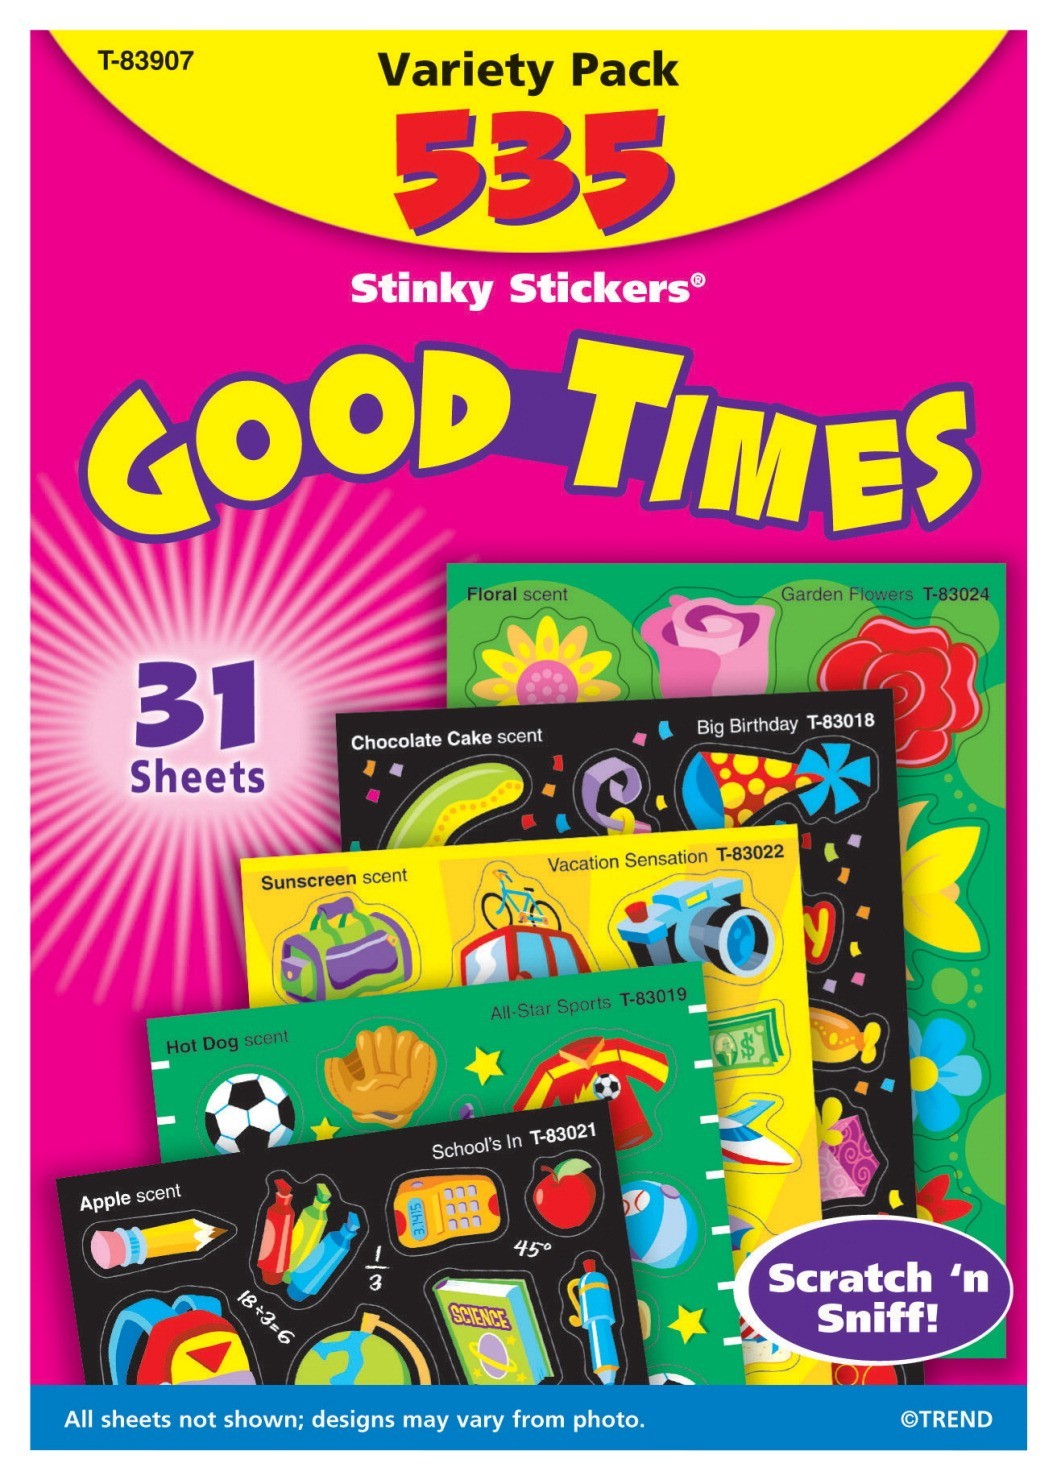 Stinky Stickers Good Times Sticker Variety Pack, 3/4 In. - 535/Pkg